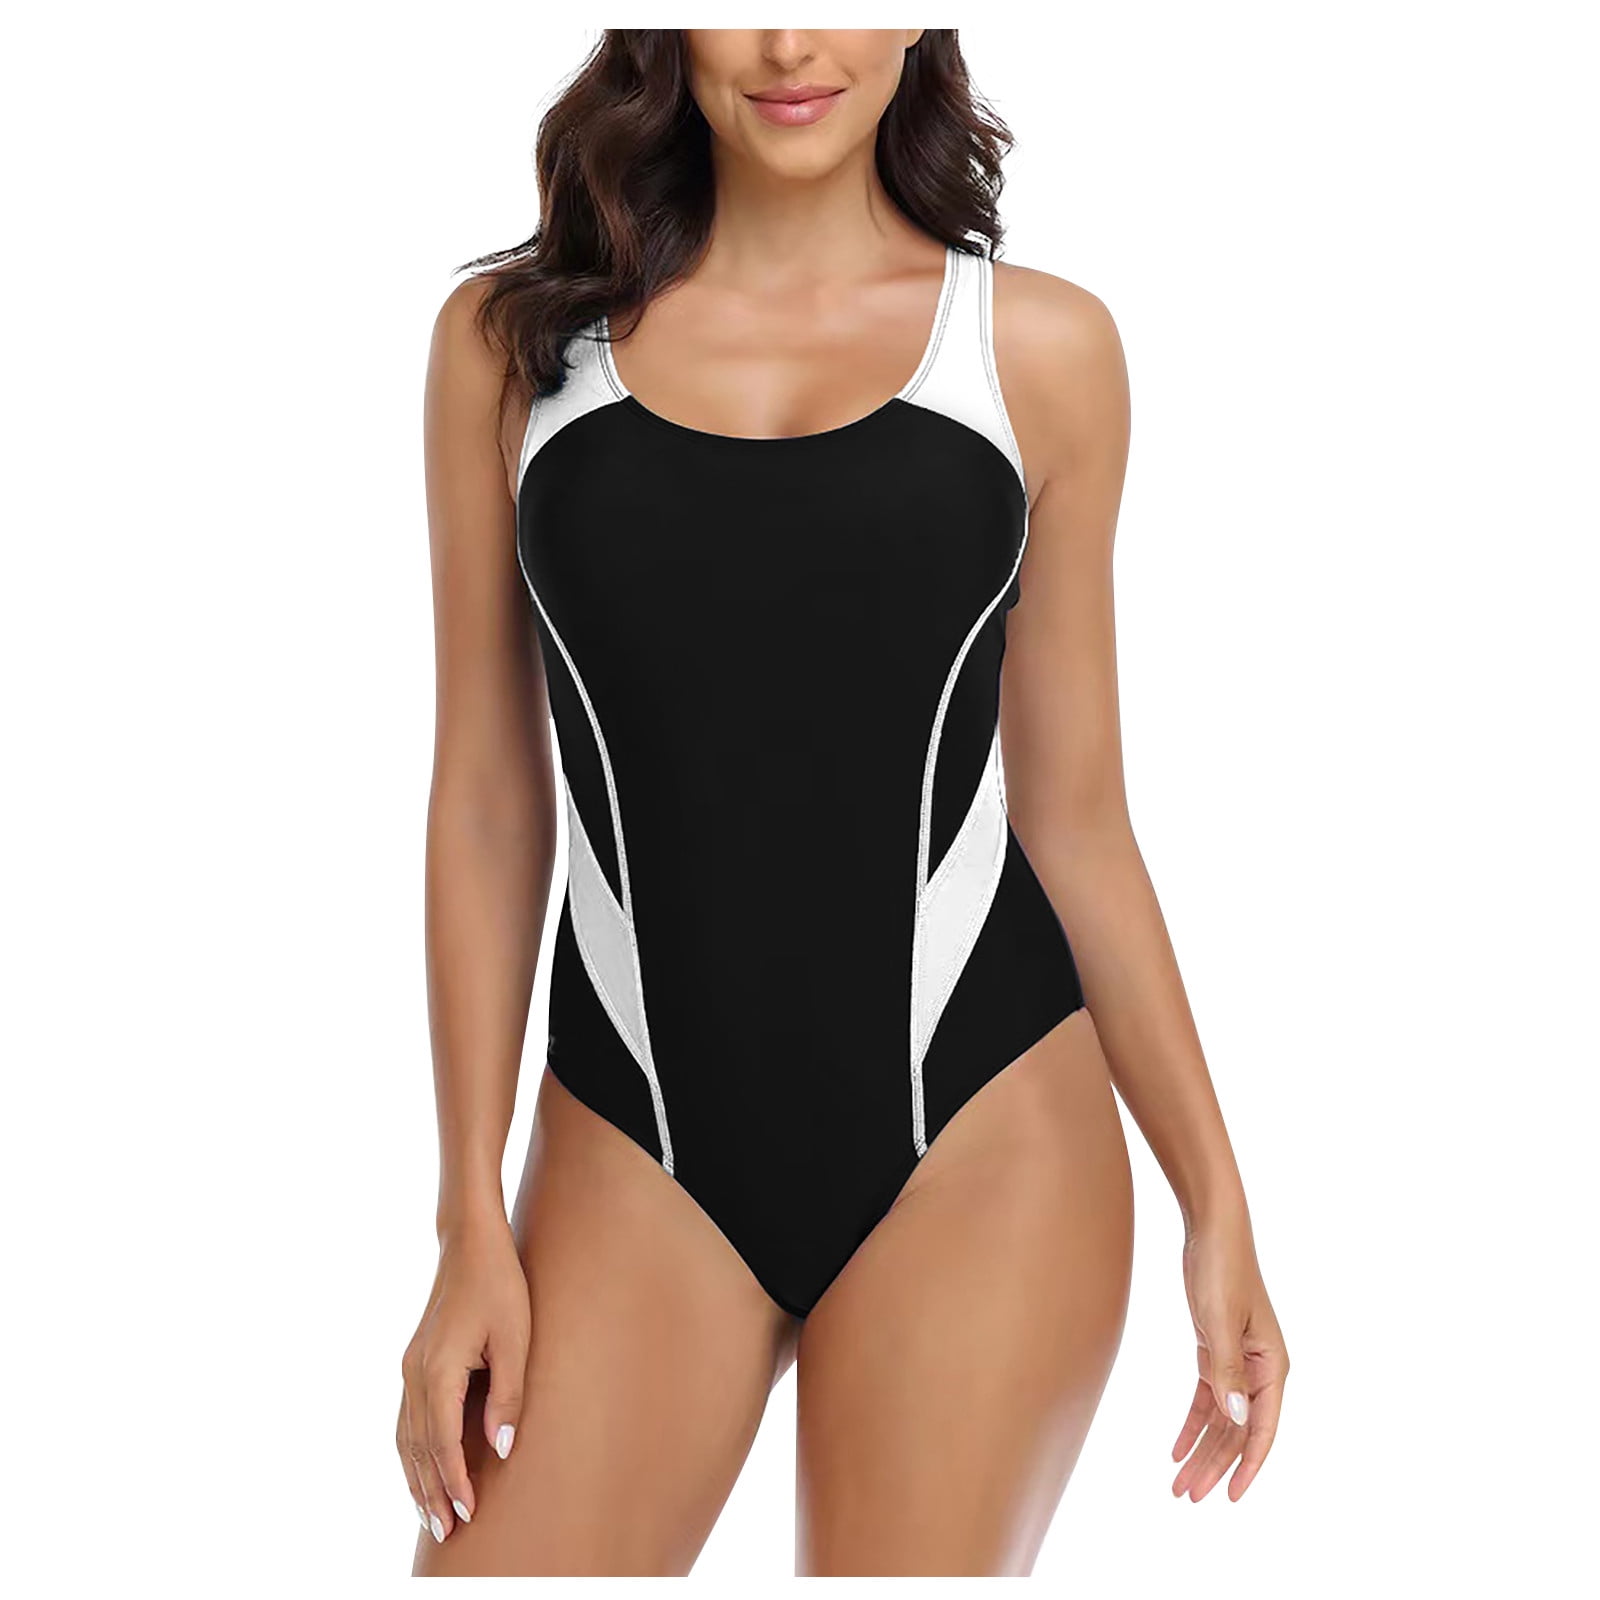 Qcmgmg Tummy Control Tank One Piece Swimsuit for Nepal